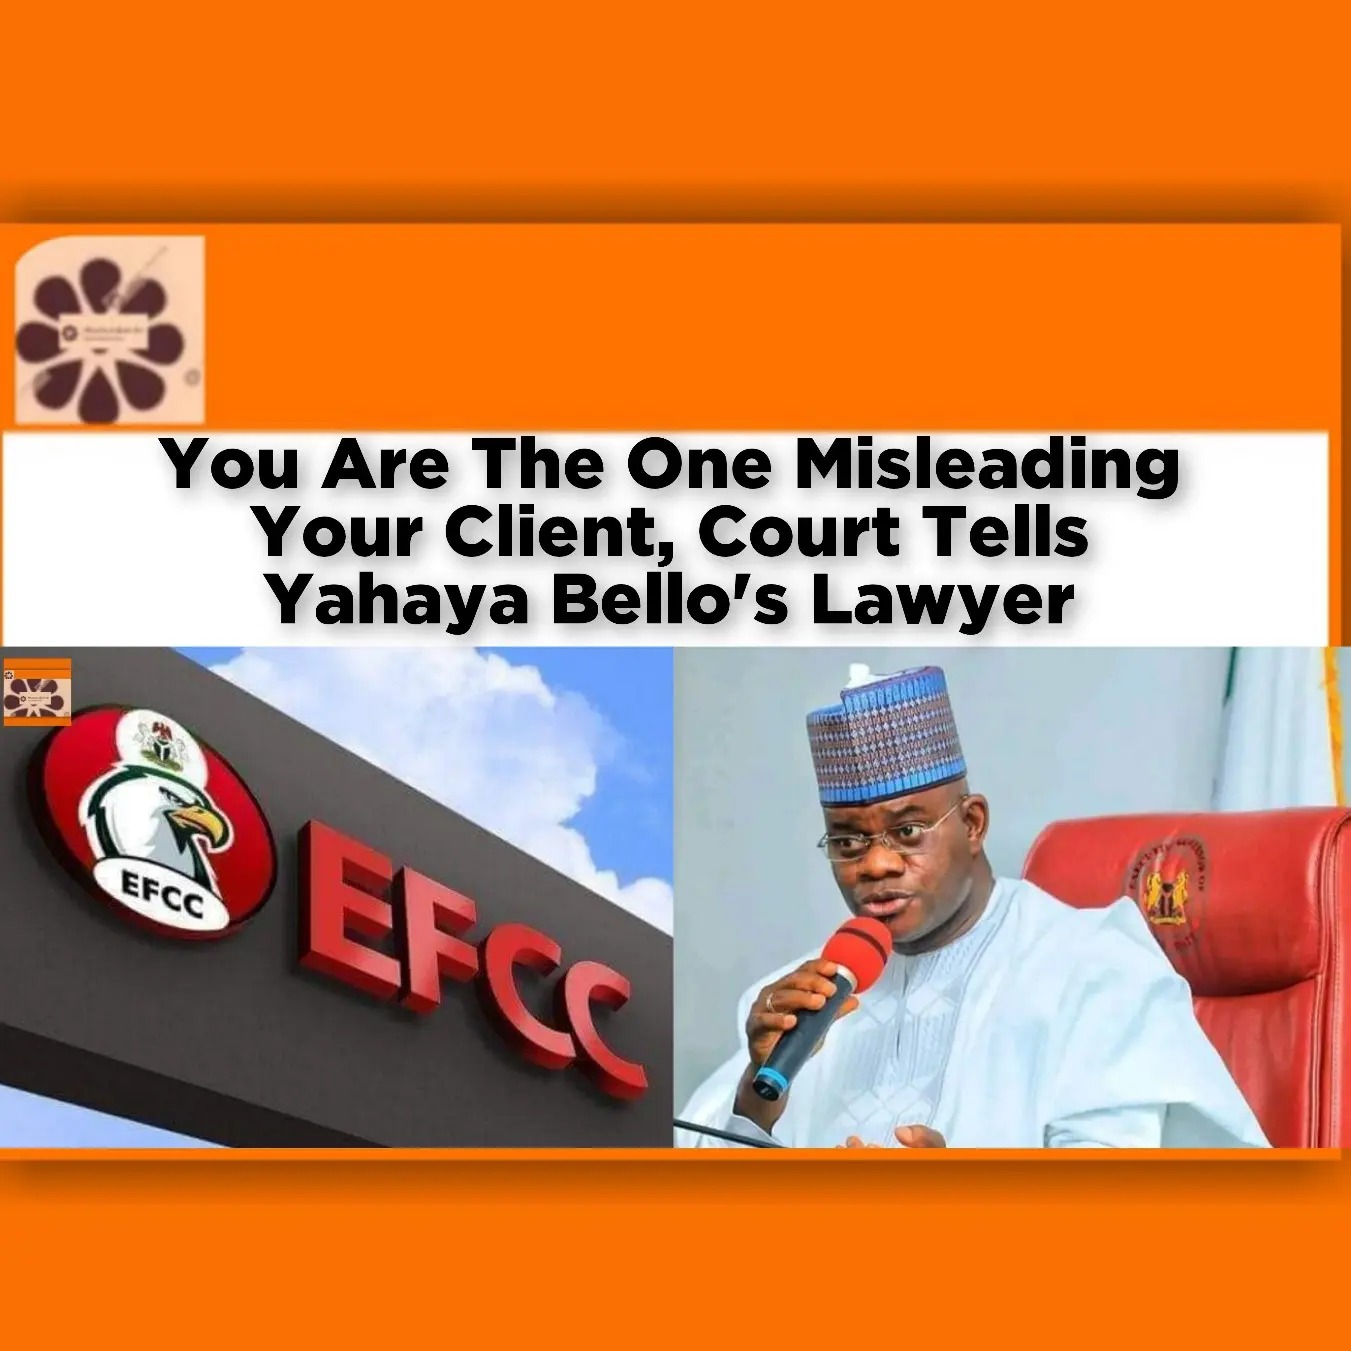 You Are The One Misleading Your Client, Court Tells Yahaya Bello's Lawyer ~ OsazuwaAkonedo #Shell